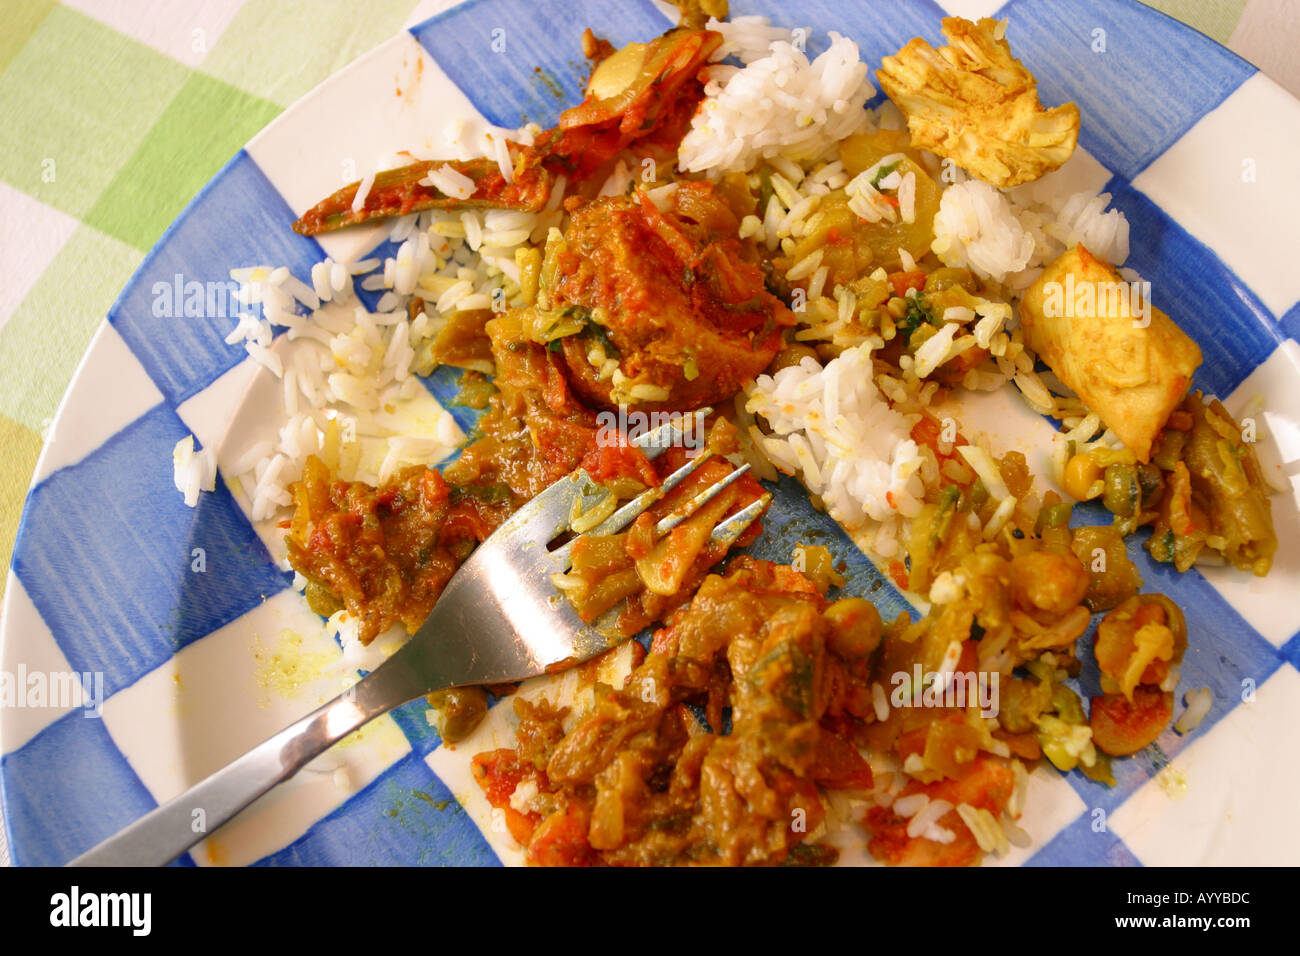 A plate of Indian takeaway food rice and curry Stock Photo